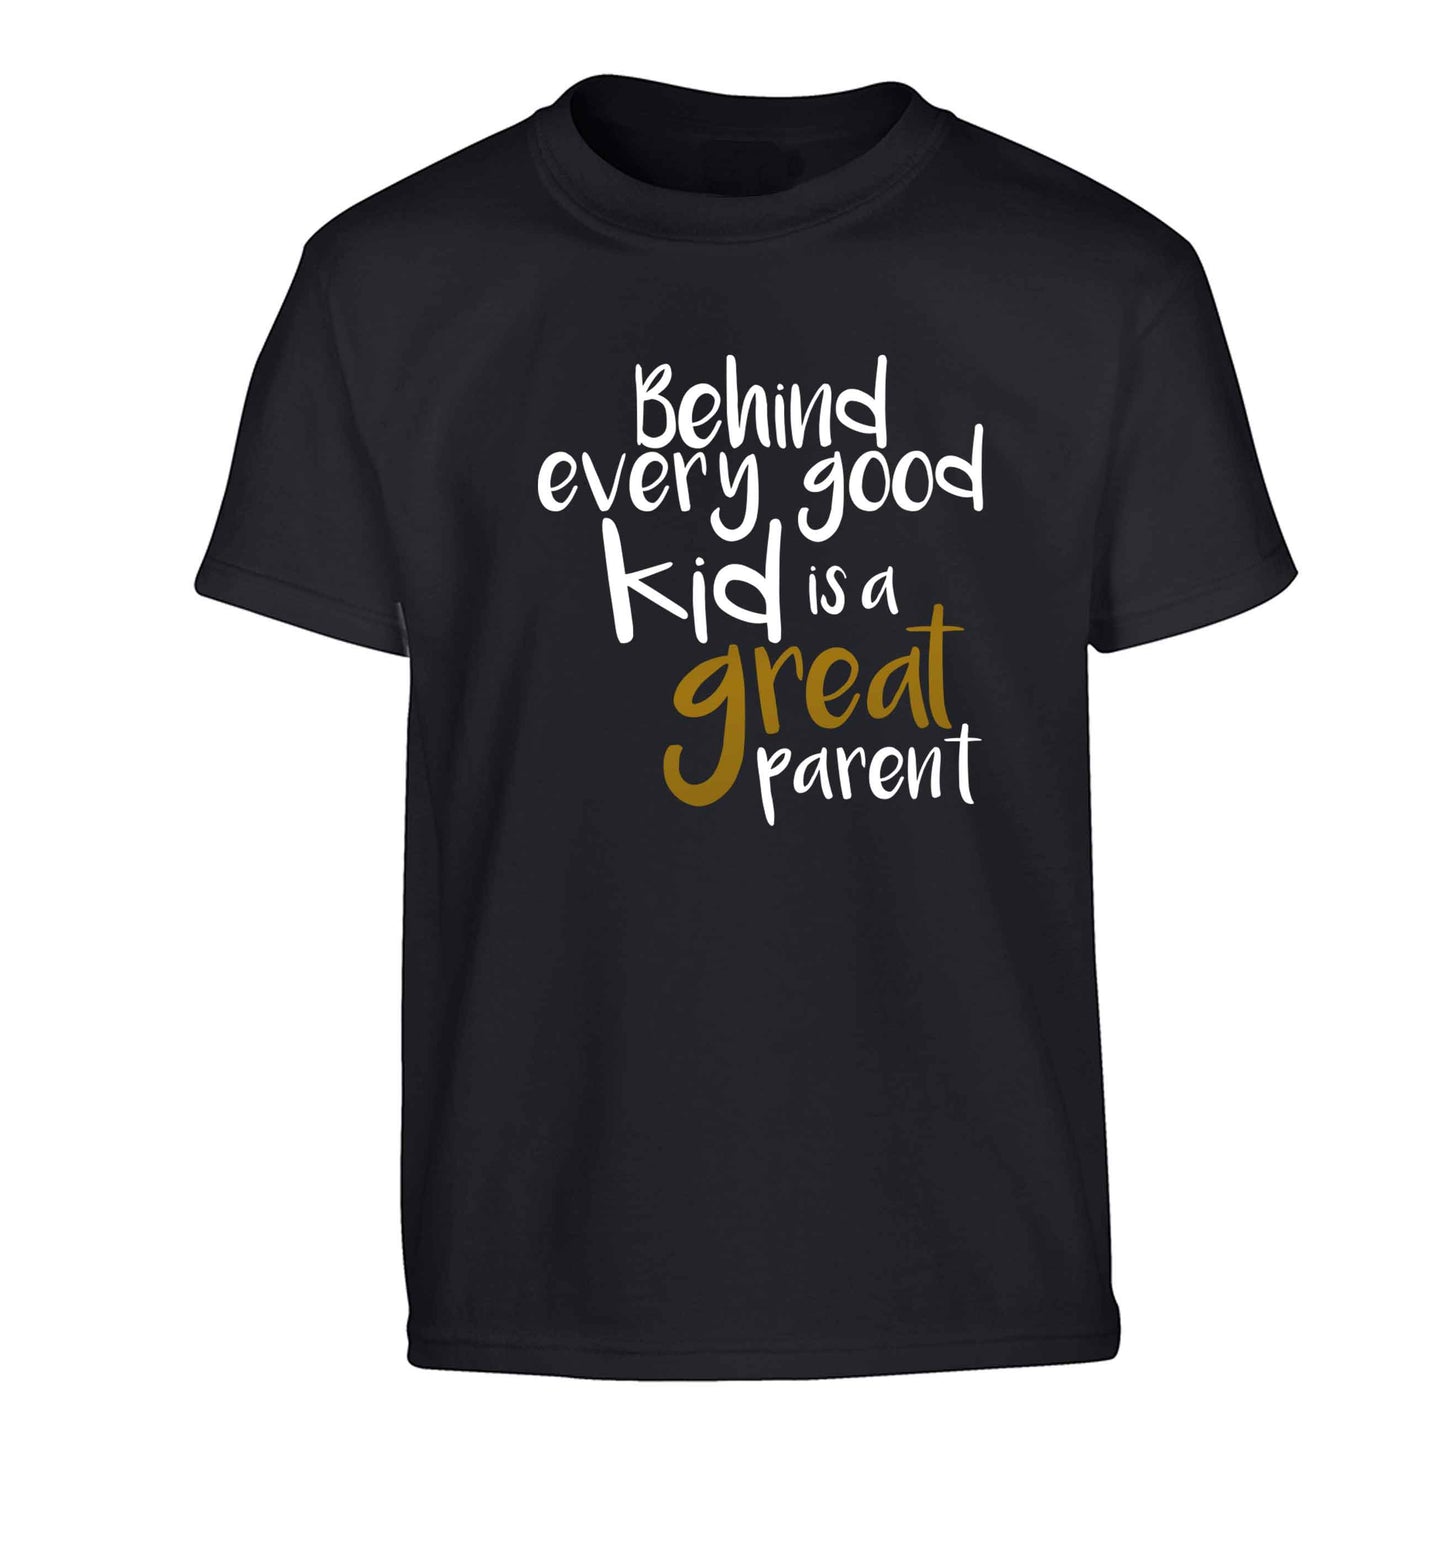 Behind every good kid is a great parent Children's black Tshirt 12-13 Years